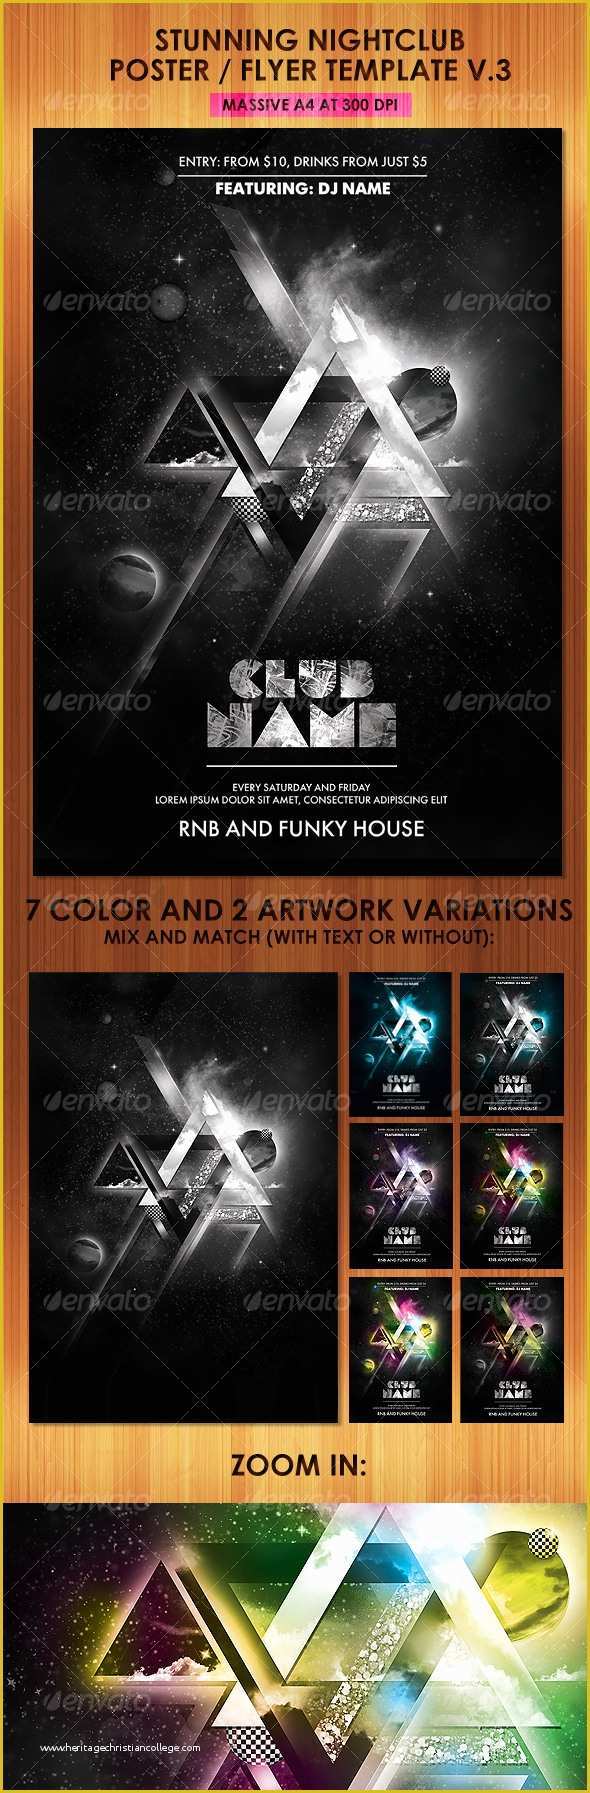 Free Club Flyer Templates Online Of Stunning Nightclub Poster Flyer Template V Print Templates